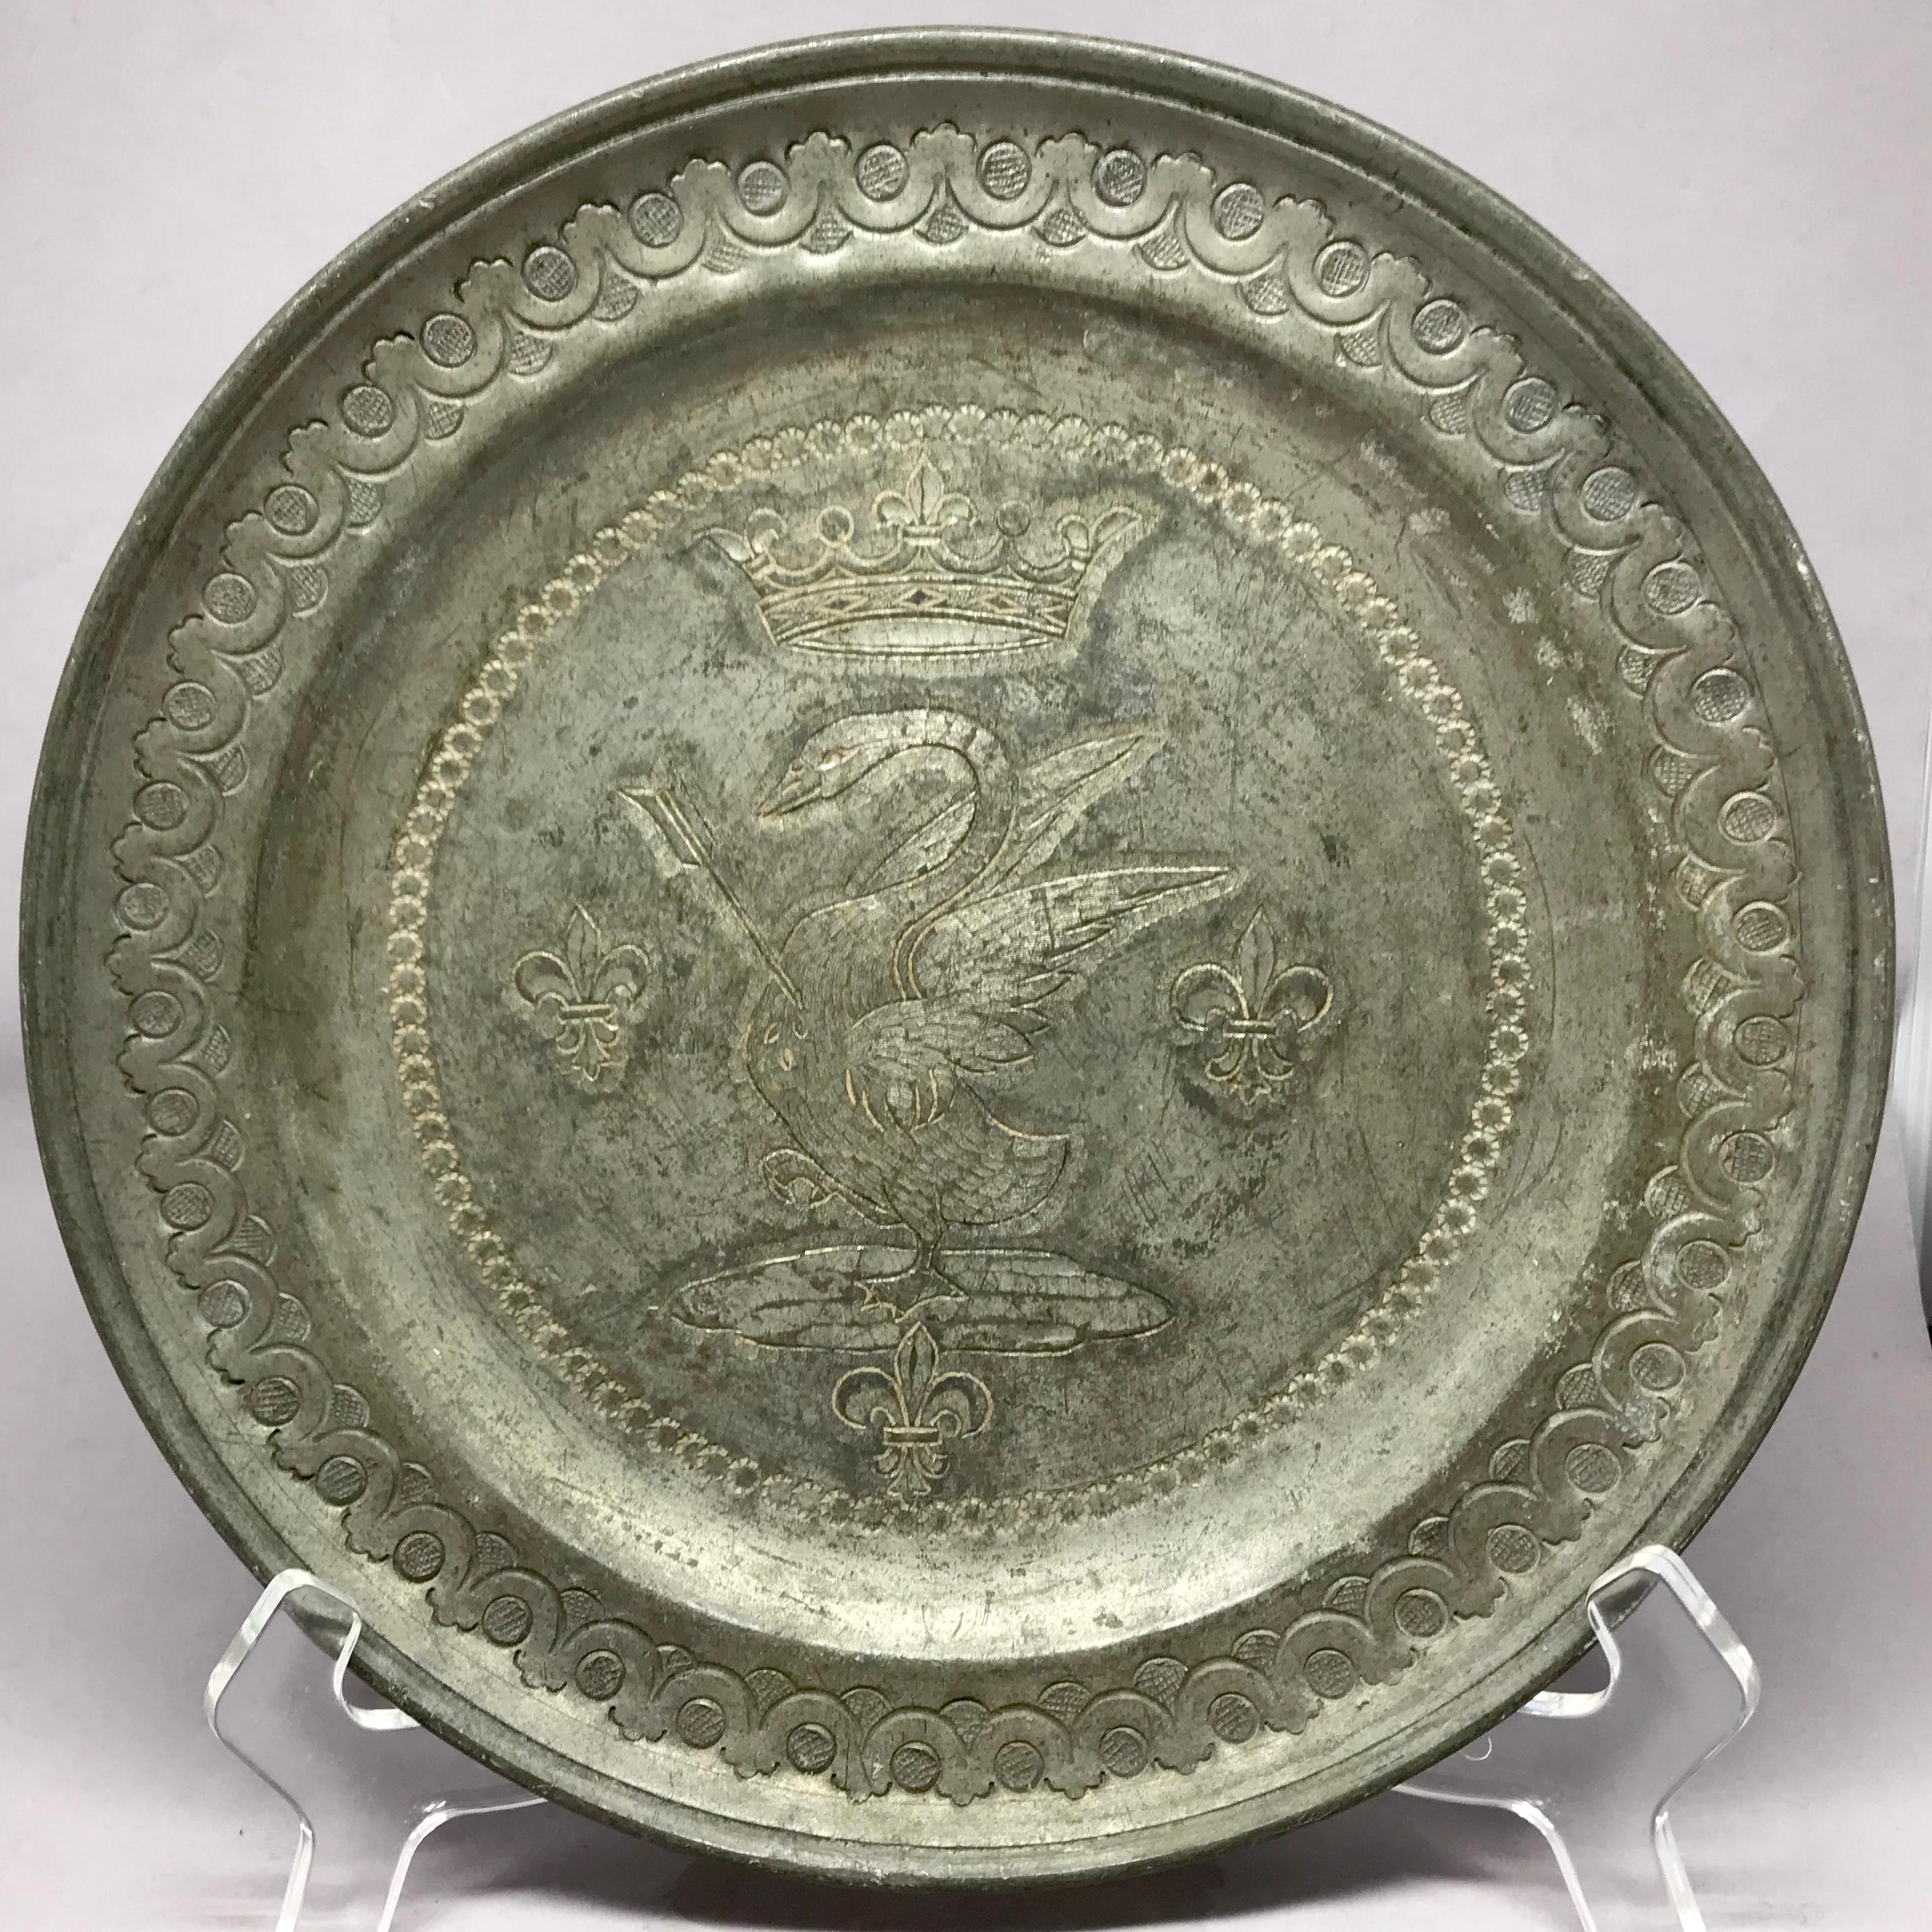 Swan Pewter plate. Elegant 9' stamped and chased pewter dish with guilloche border centering a crowned and impaled swan flanked by three fleur-de-lis and further impressed bead banding. Markings for 